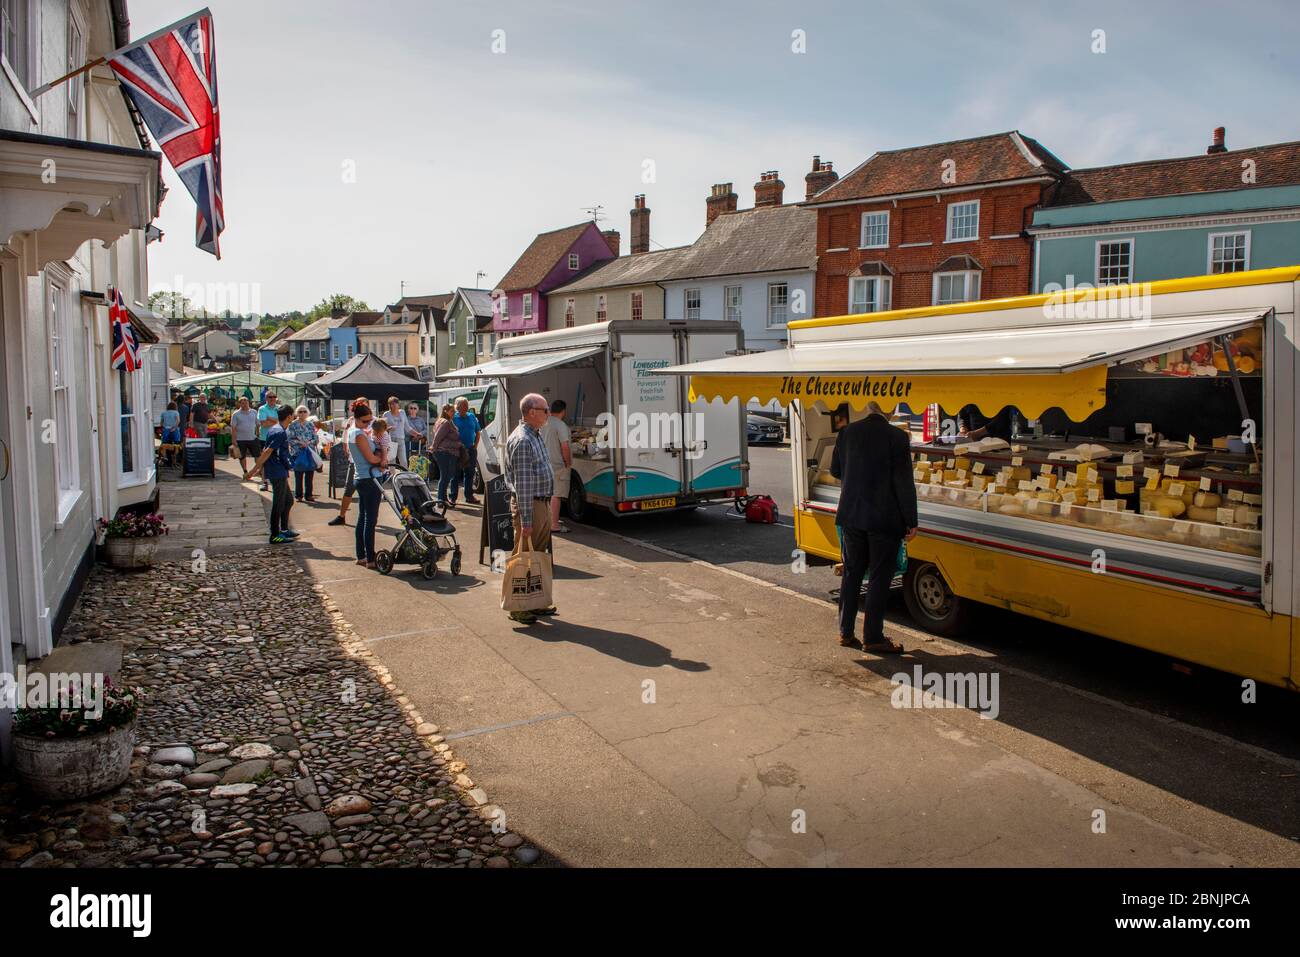 Thaxted Essex England. Market day showing social distancing due to Coronavirus. 8 May 2020 Stock Photo